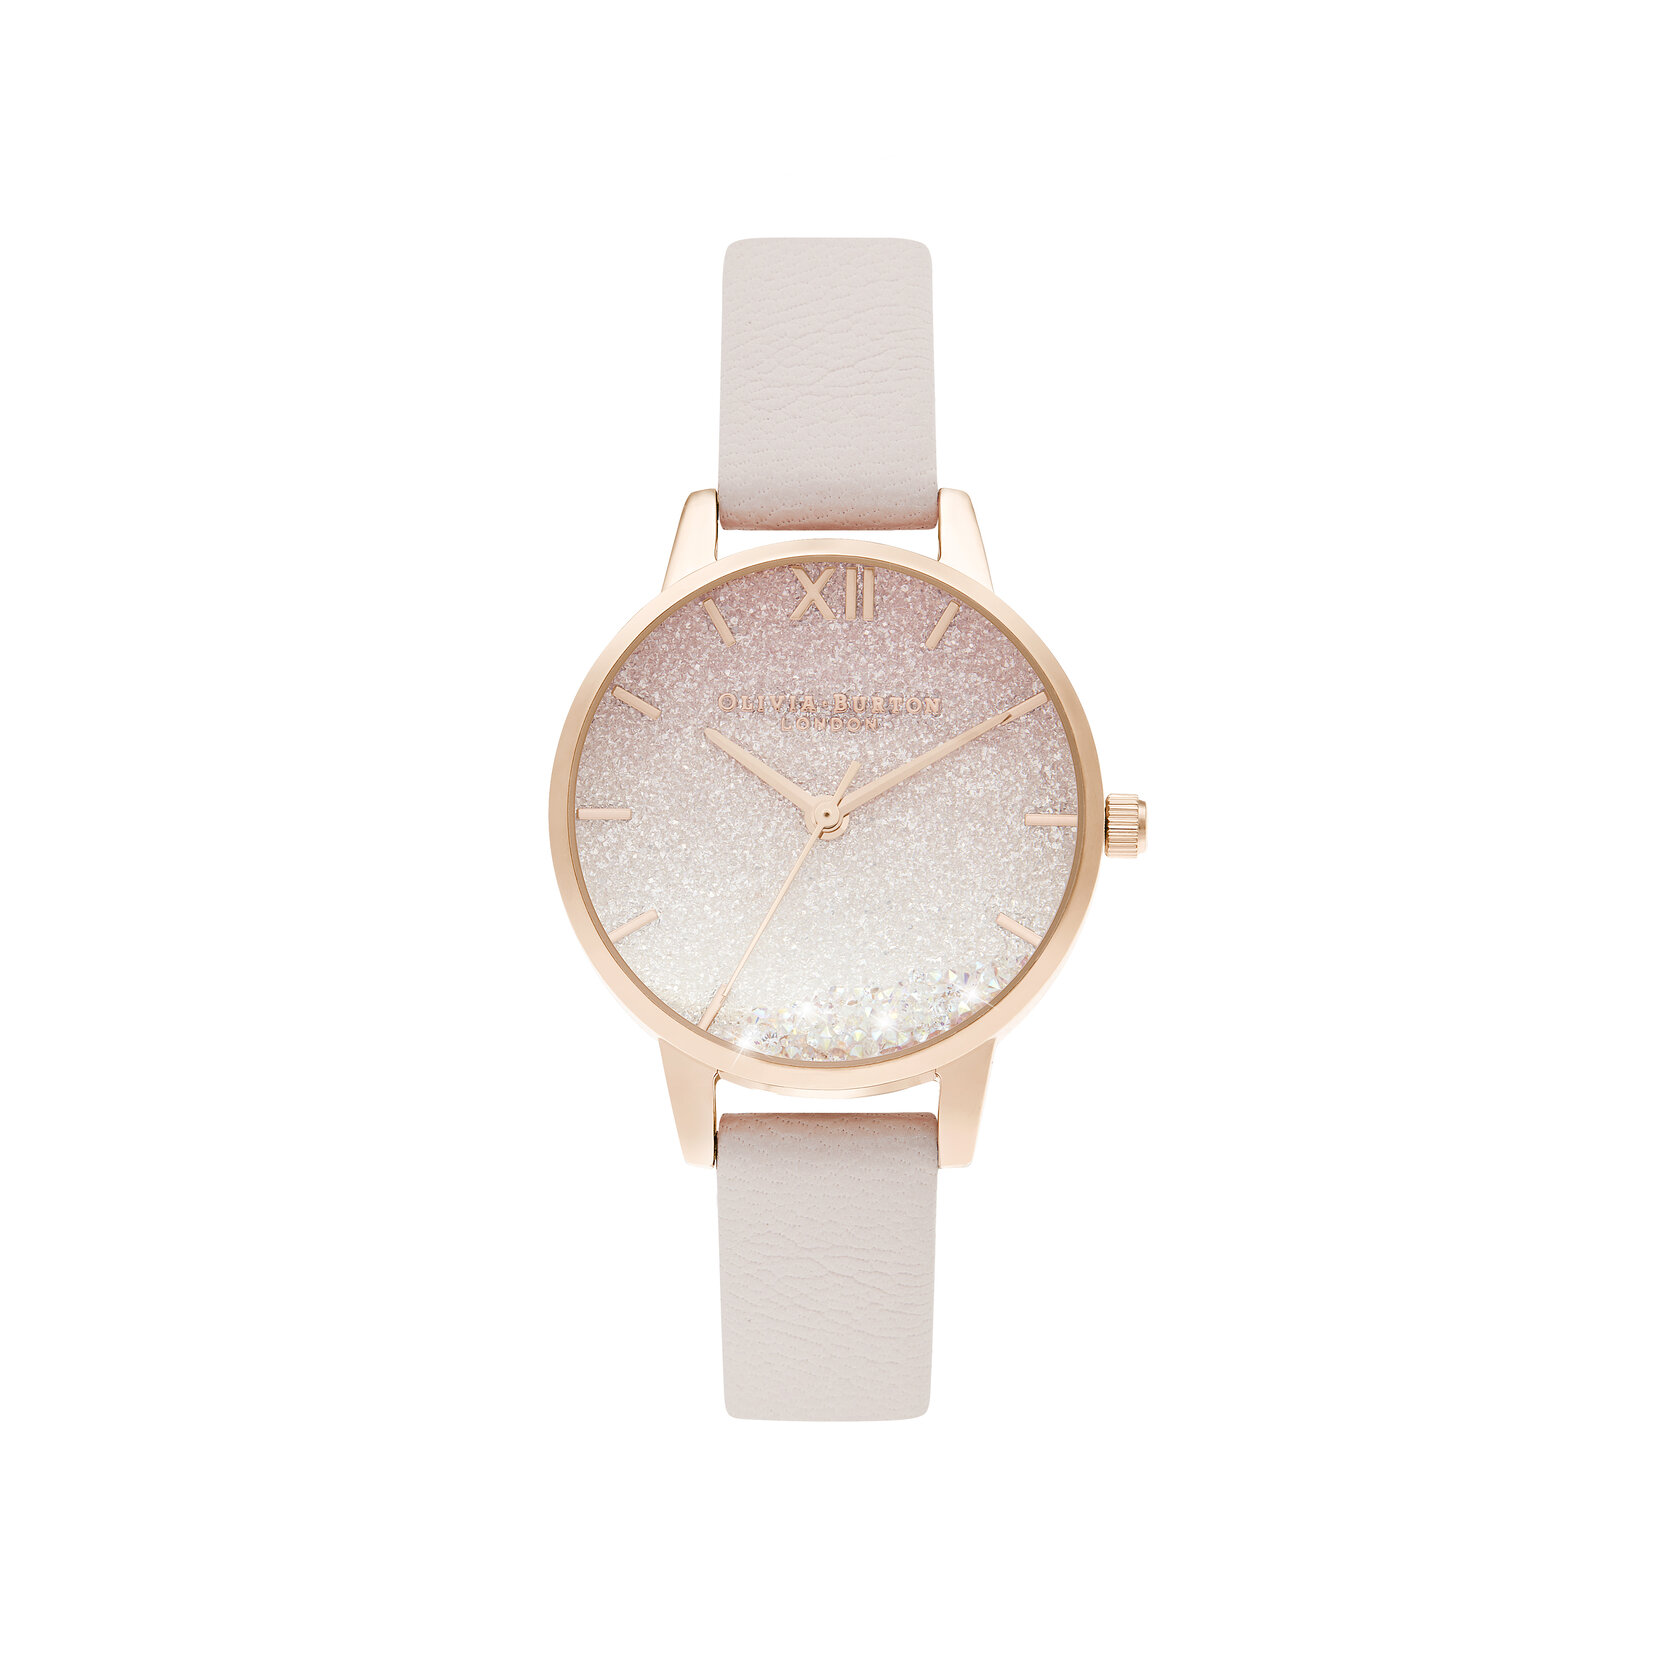 30mm Rose Gold & Pink Leather Strap Watch